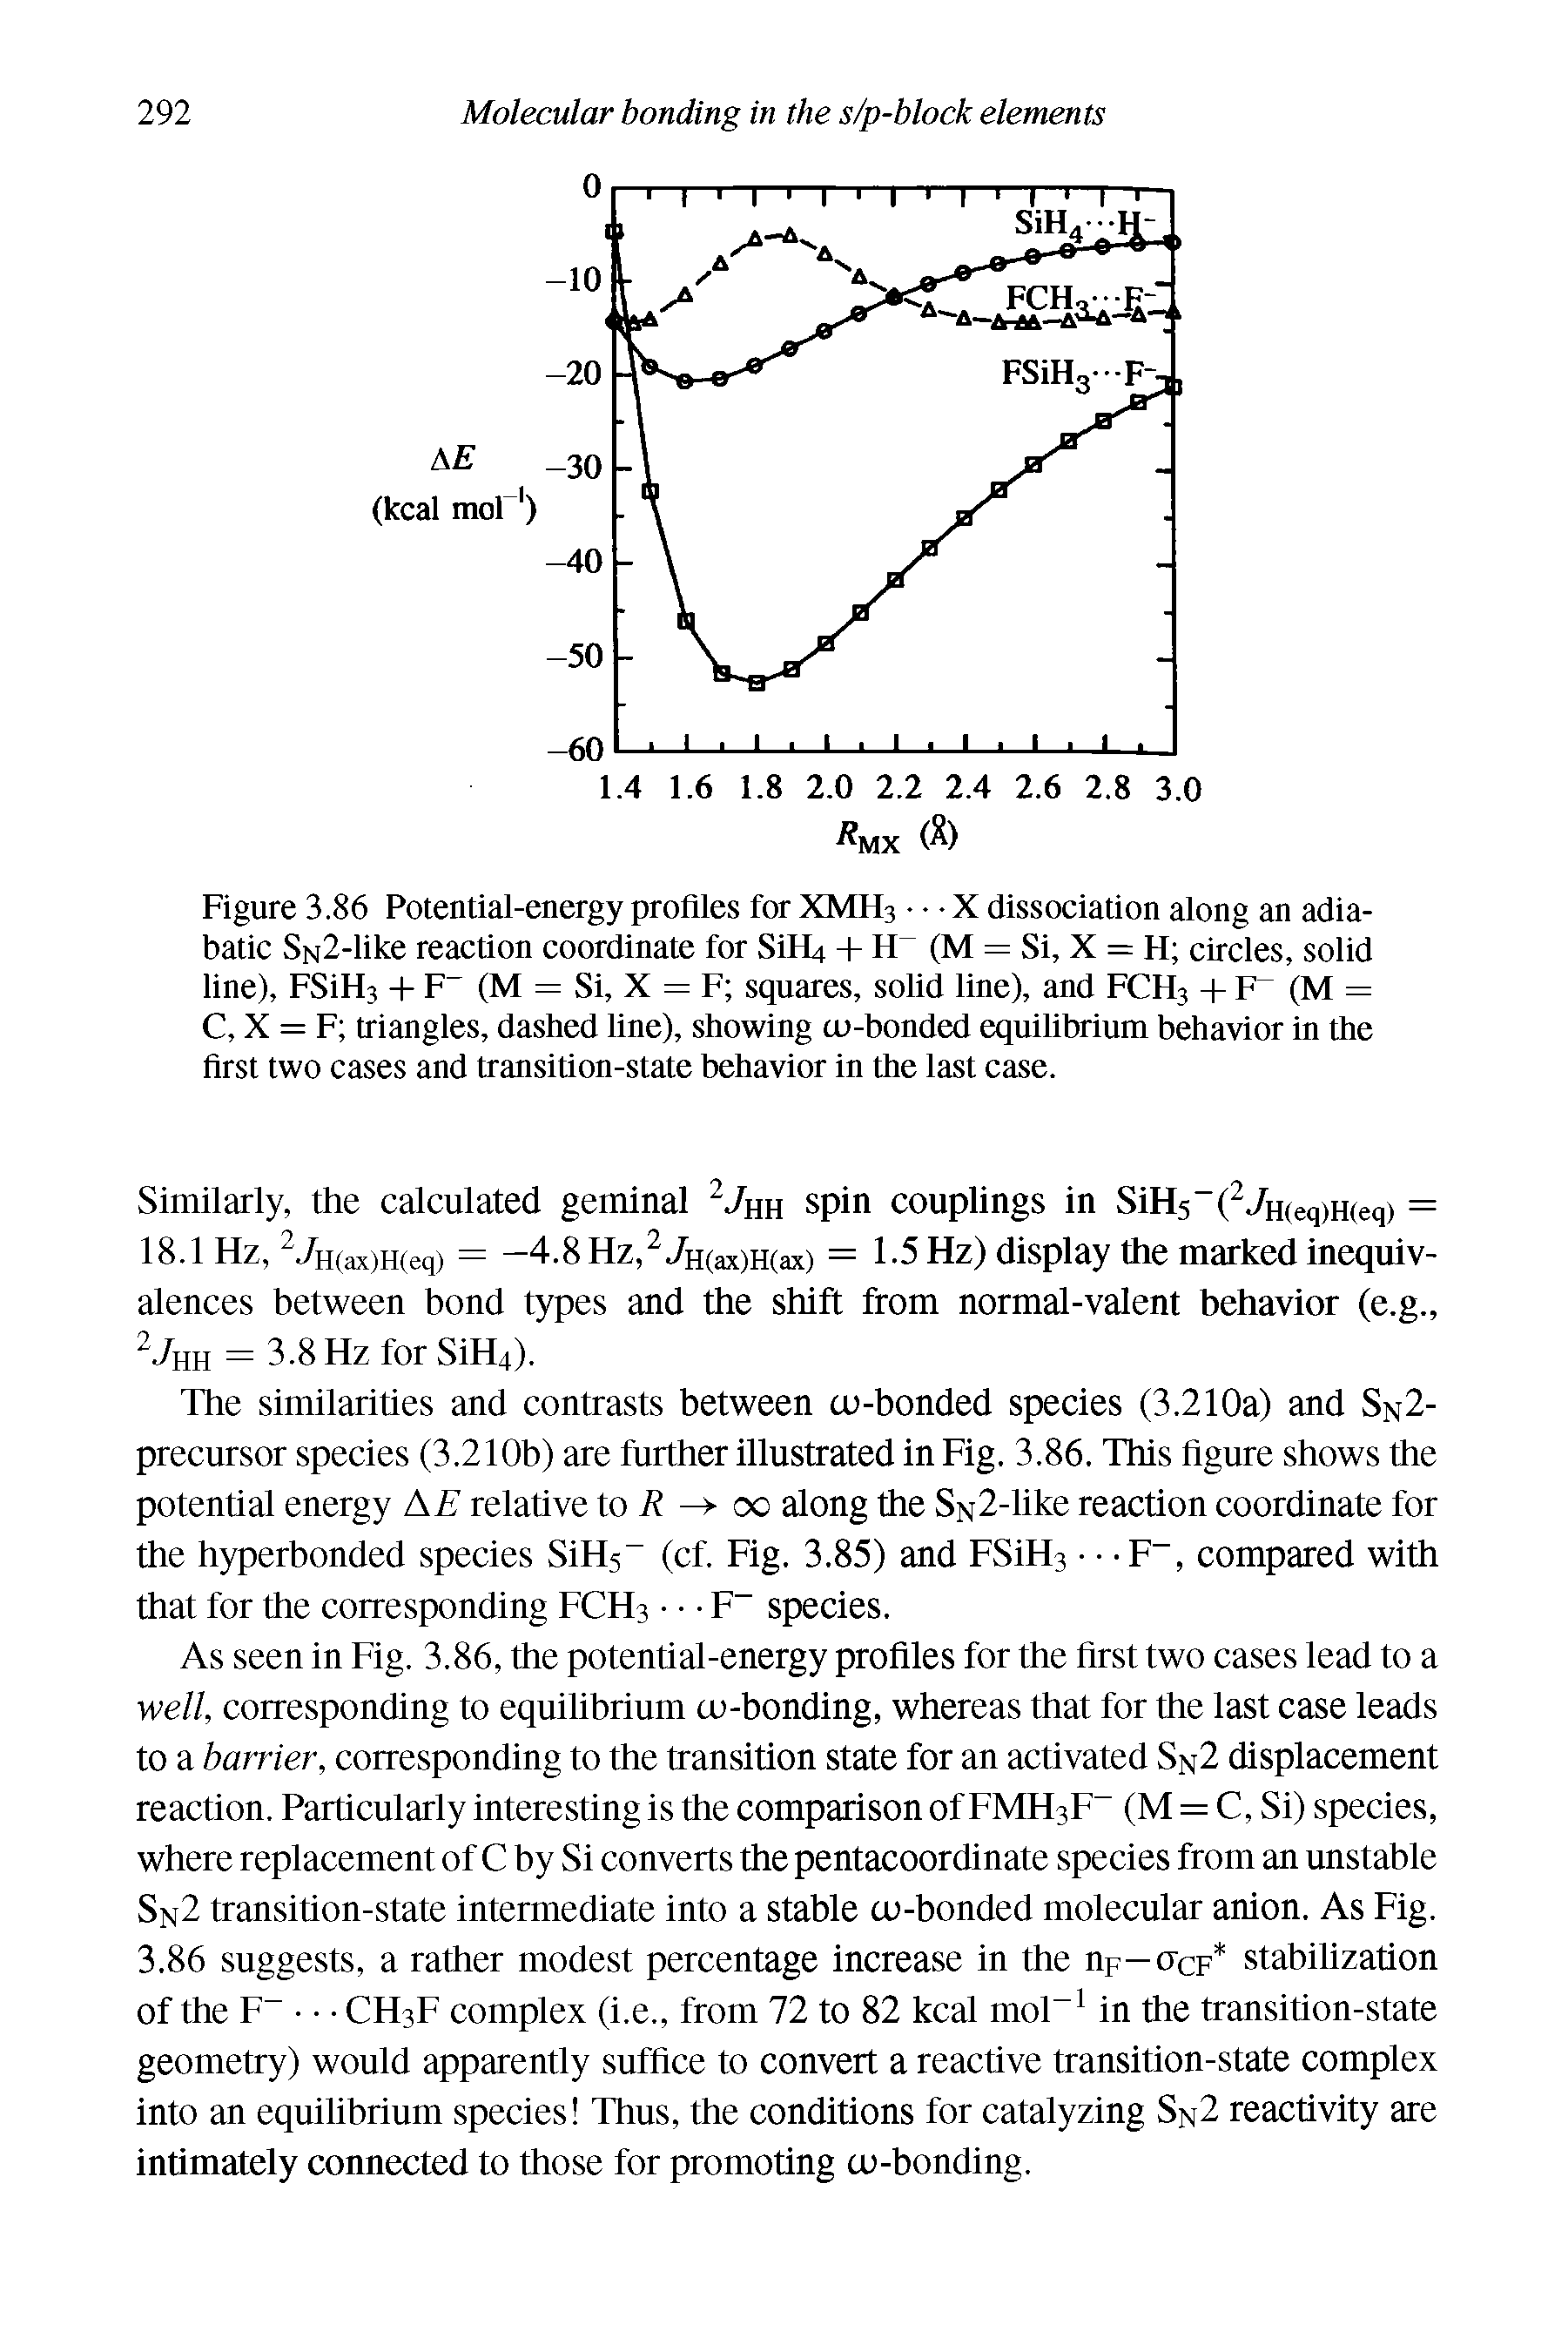 Figure 3.86 Potential-energy profiles for XMH3 X dissociation along an adiabatic SN2-like reaction coordinate for Sift + H (M = Si, X = H circles, solid line), FSiH3 + F (M = Si, X = F squares, solid line), and FCH3 + F (M = C, X = F triangles, dashed line), showing cu-bonded equilibrium behavior in the first two cases and transition-state behavior in the last case.